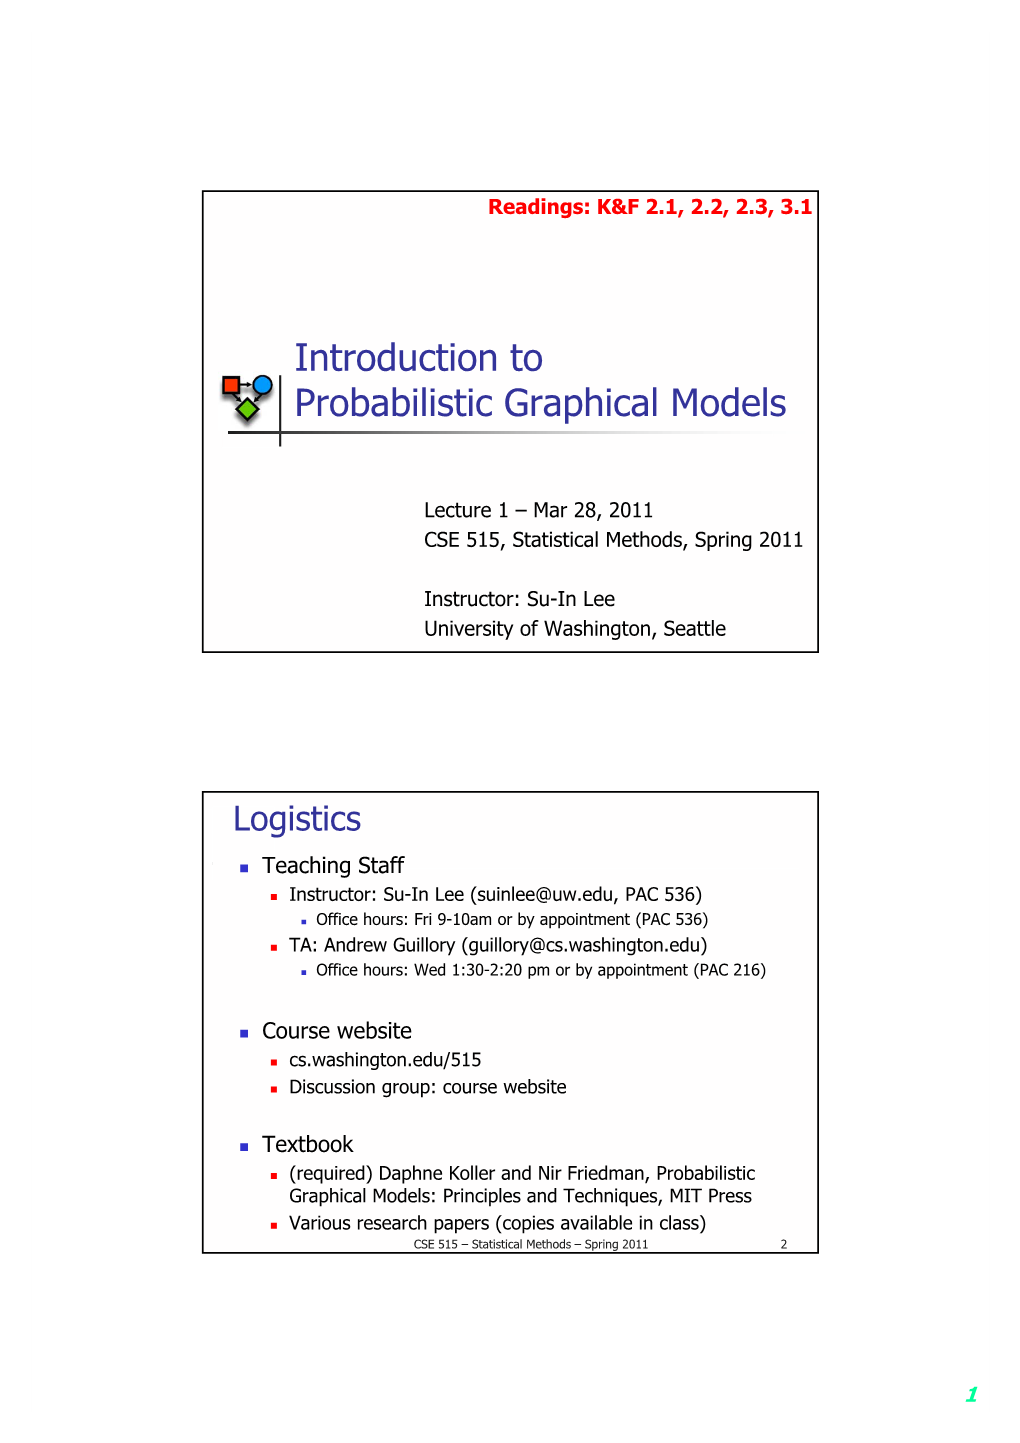 Introduction to Probabilistic Graphical Models